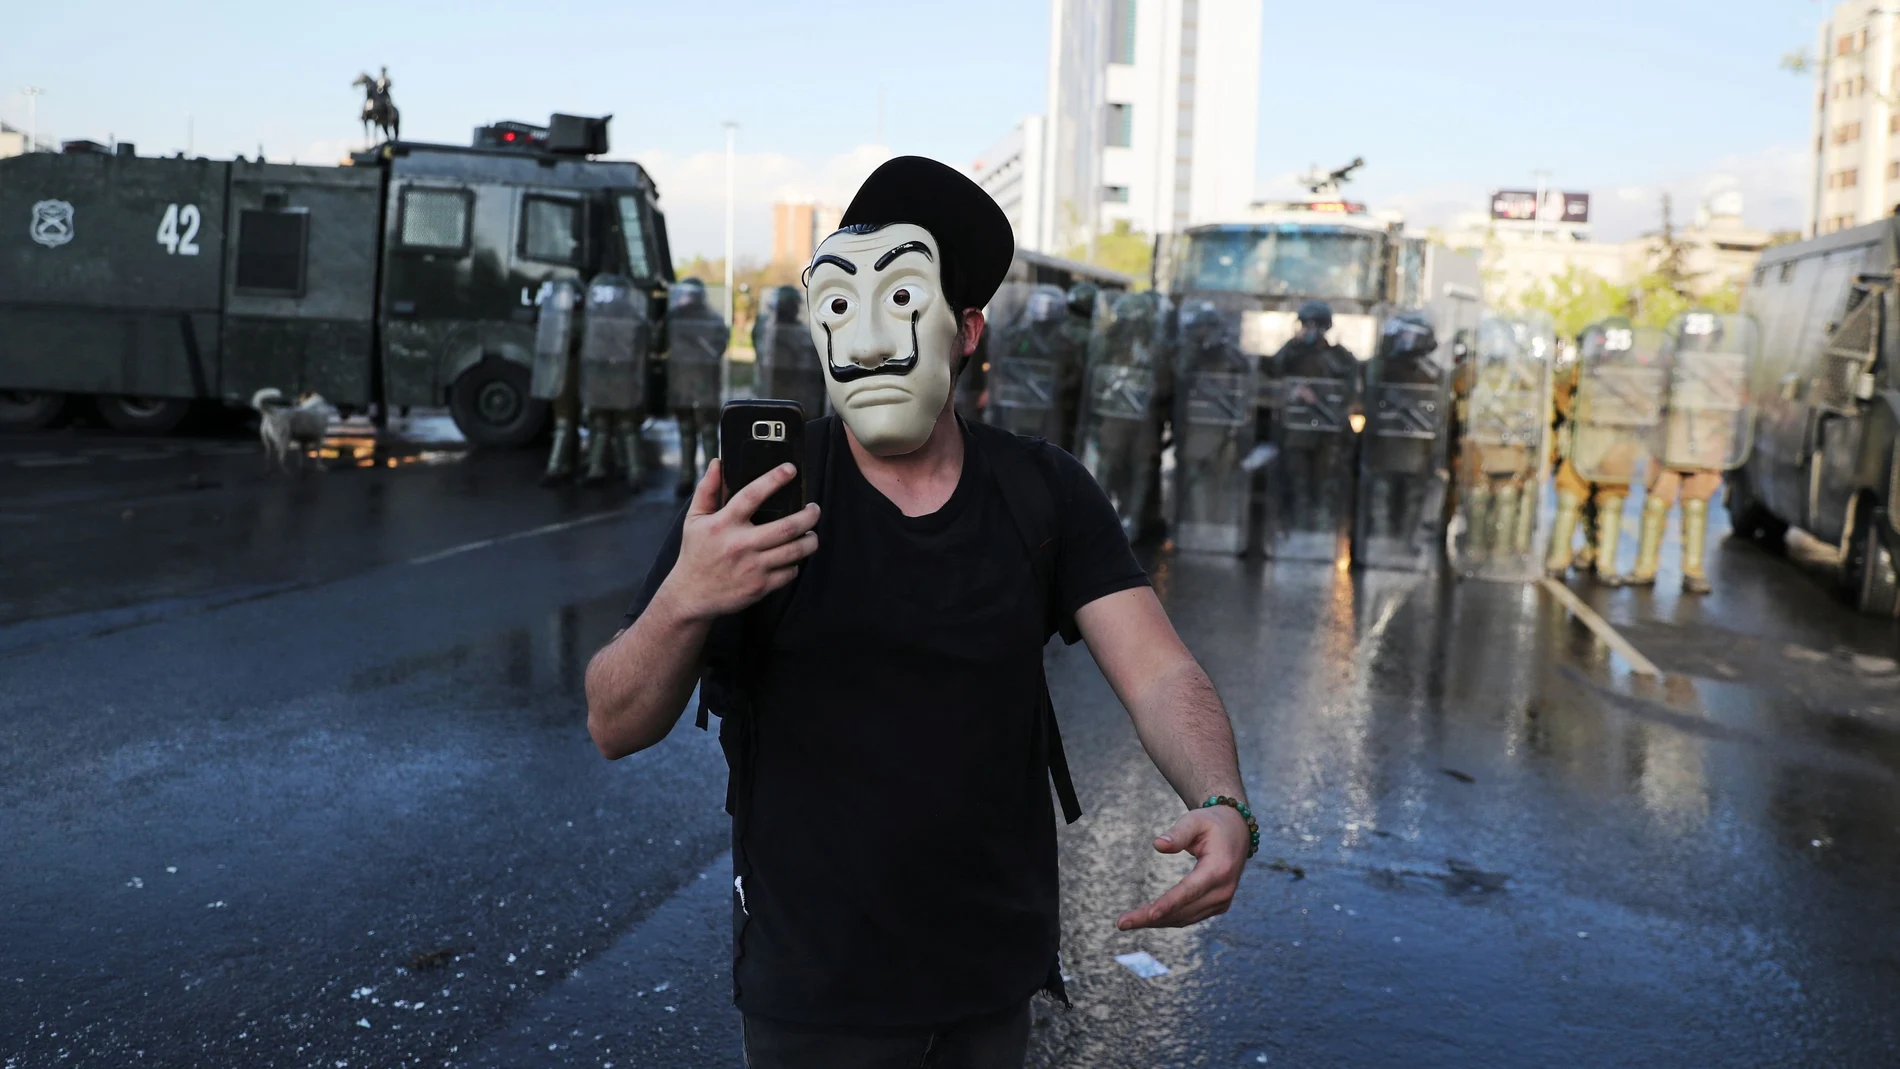 A masked man walks in front of riot police during a protest against Chile's government, in Santiago, Chile October 2, 2020. REUTERS/Ivan Alvarado